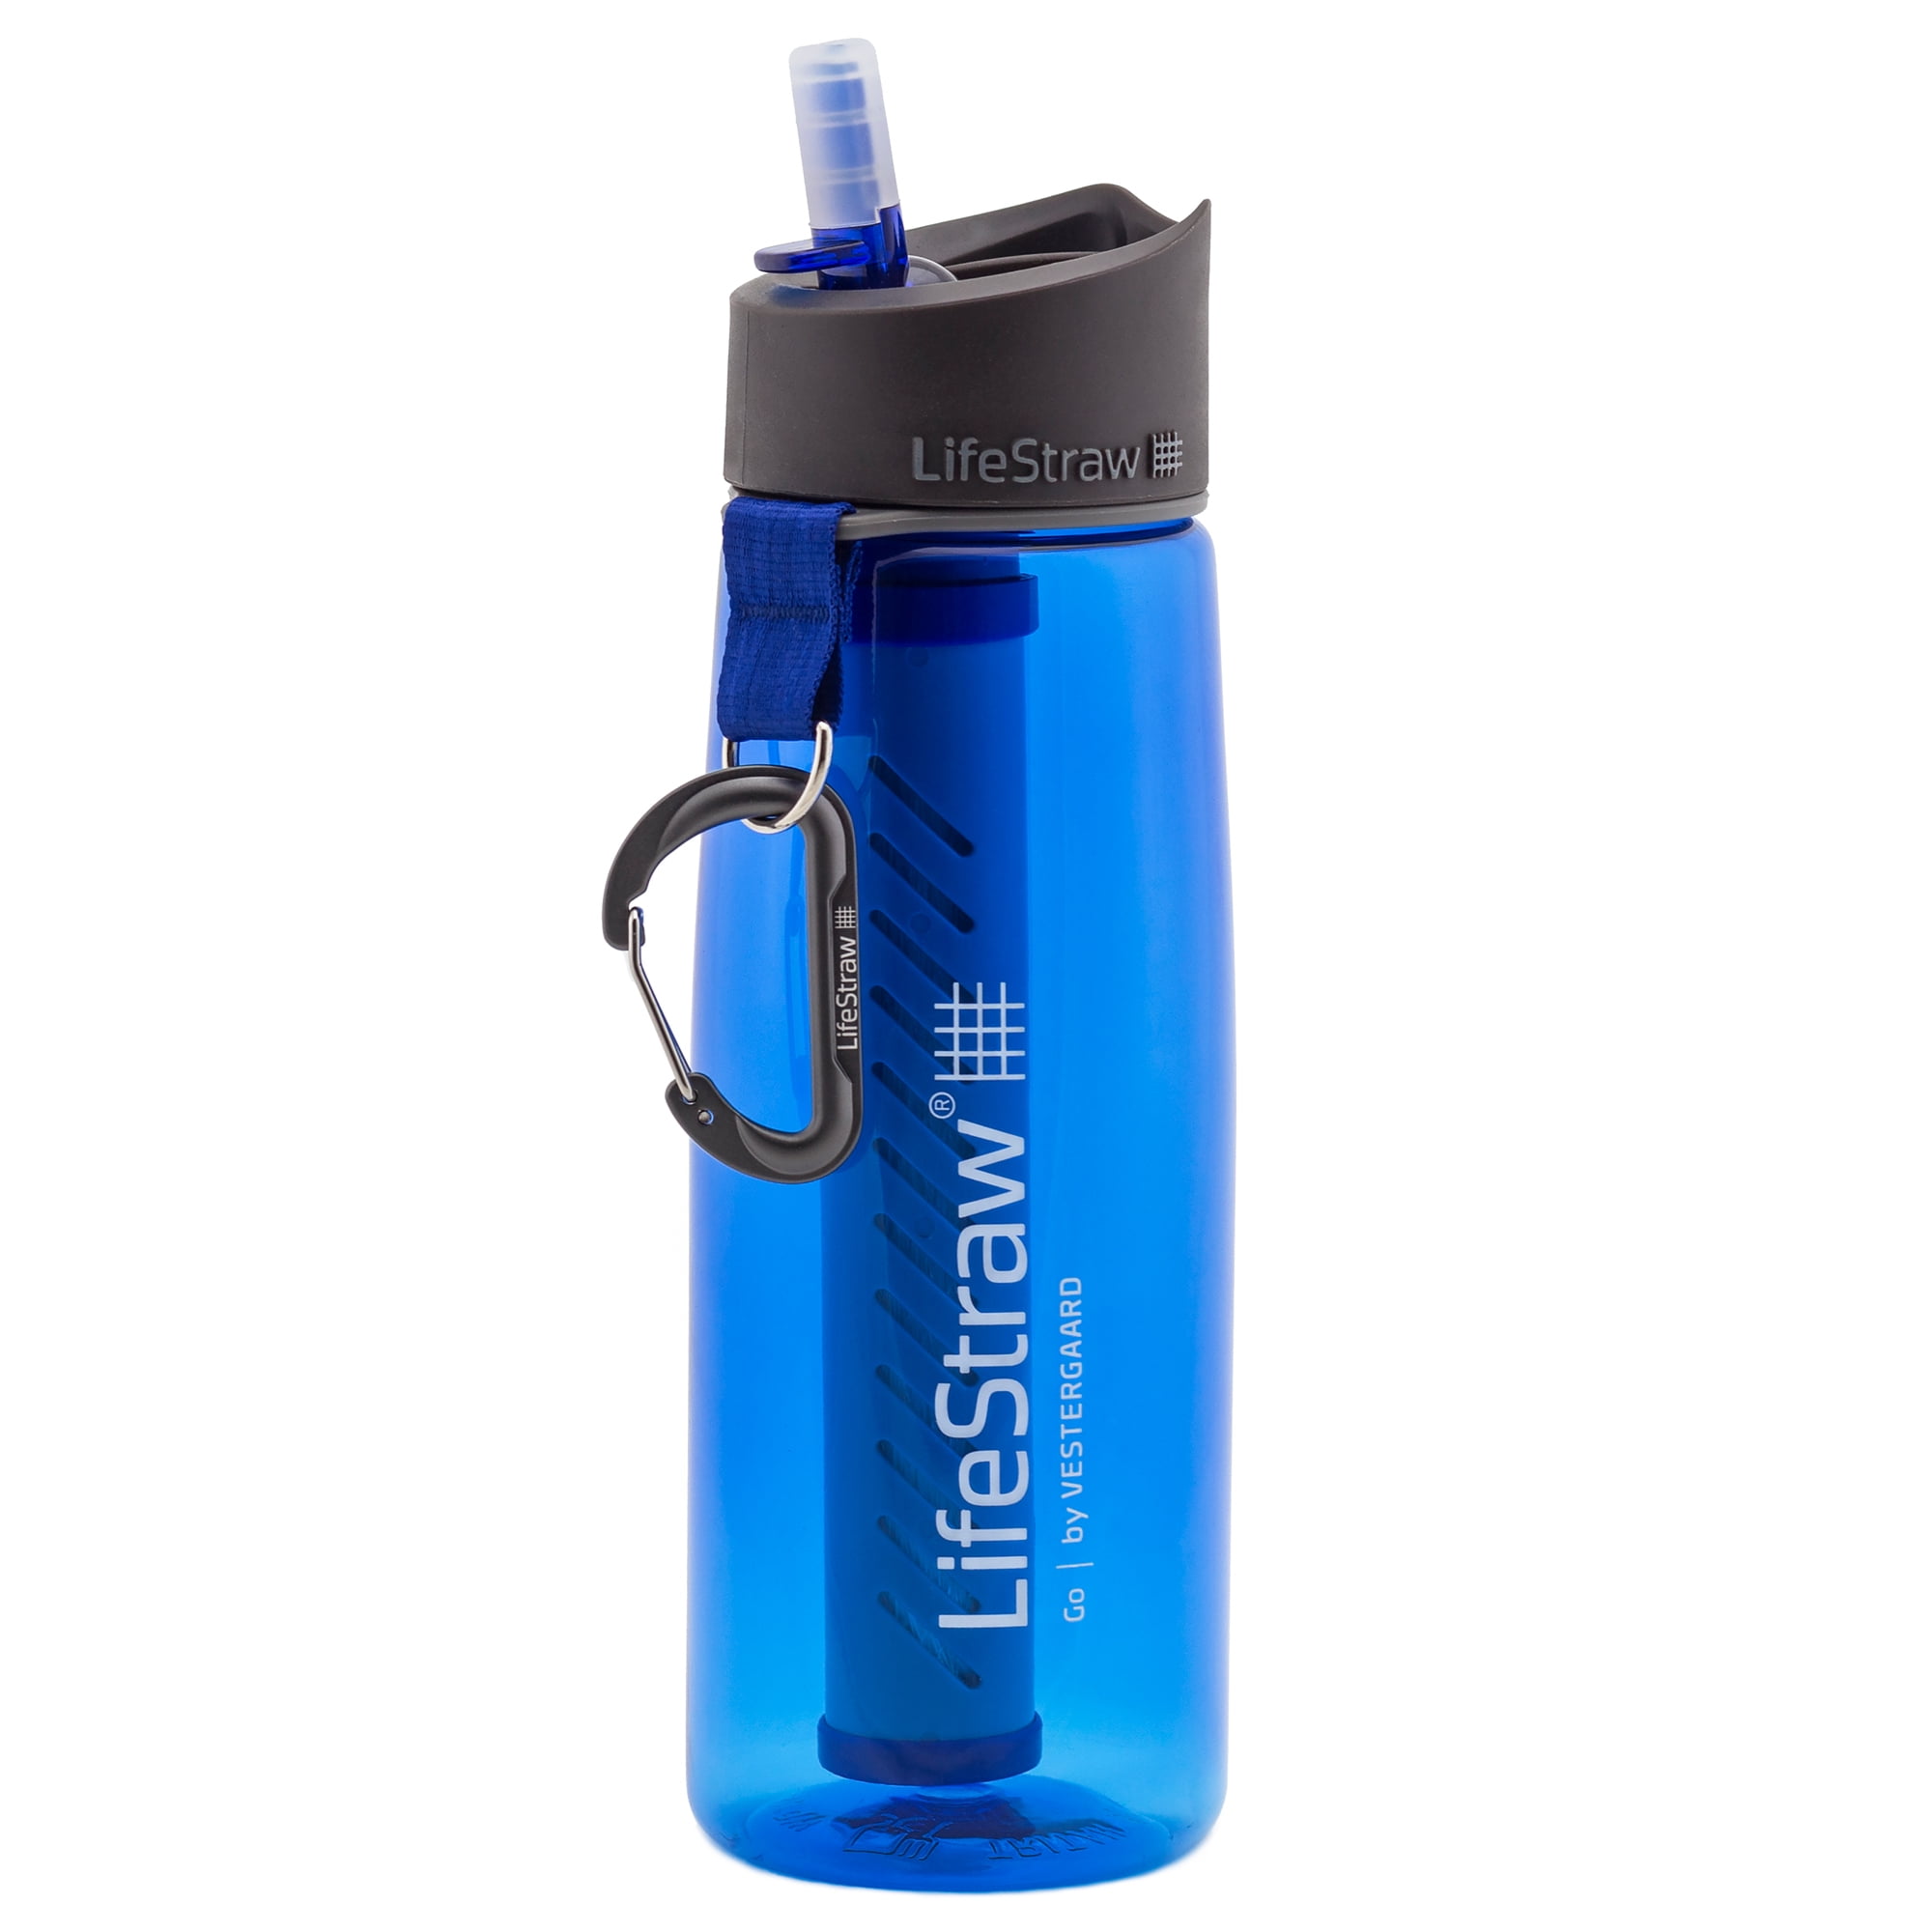 LifeStraw Go 22oz Water Filter Bottle for Hiking, Camping, Travel